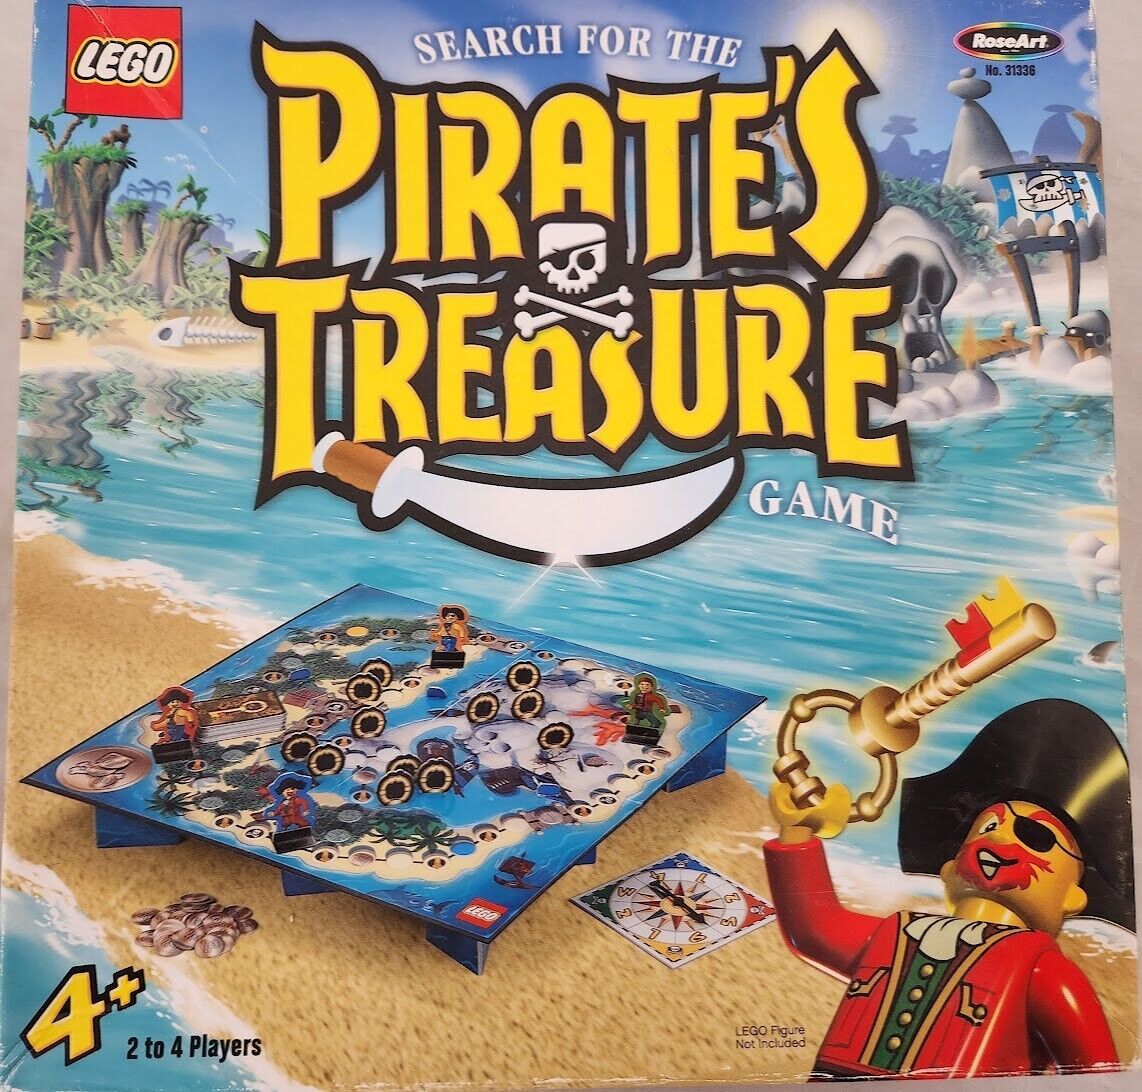 RoseArt  LEGO  Search For The Pirate's Treasure Game 31336 - 2005 - $12.82